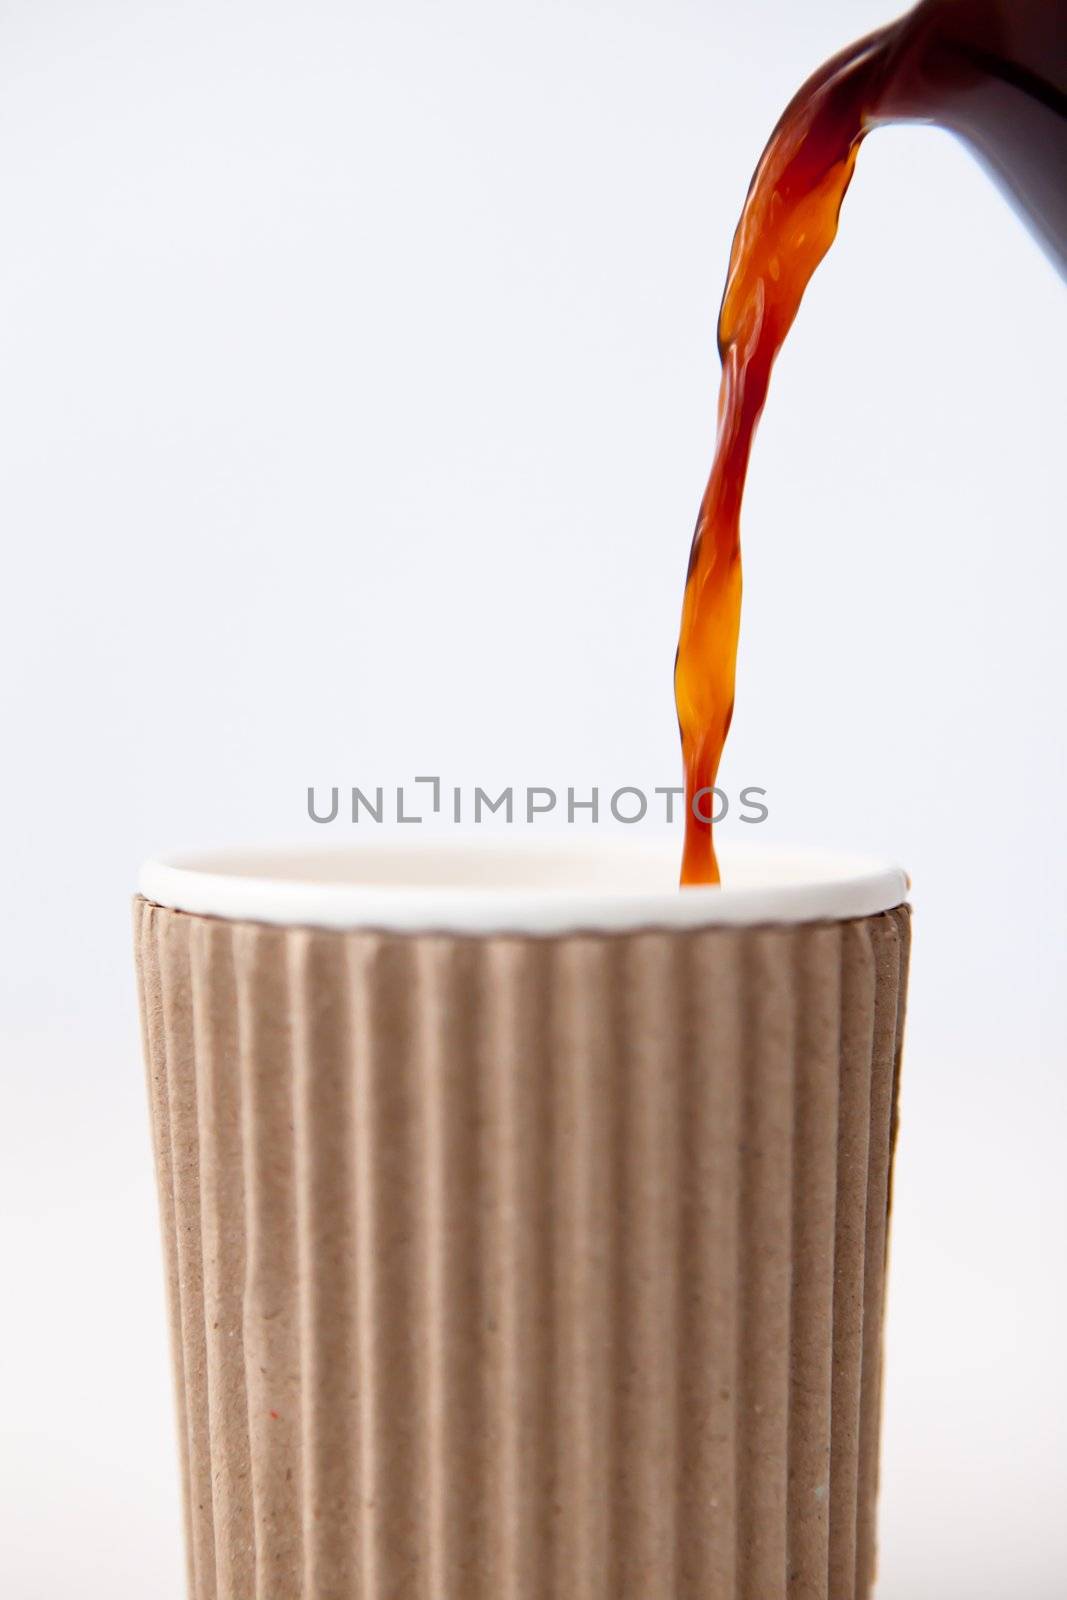 Paper cup being filled with coffee against a white background